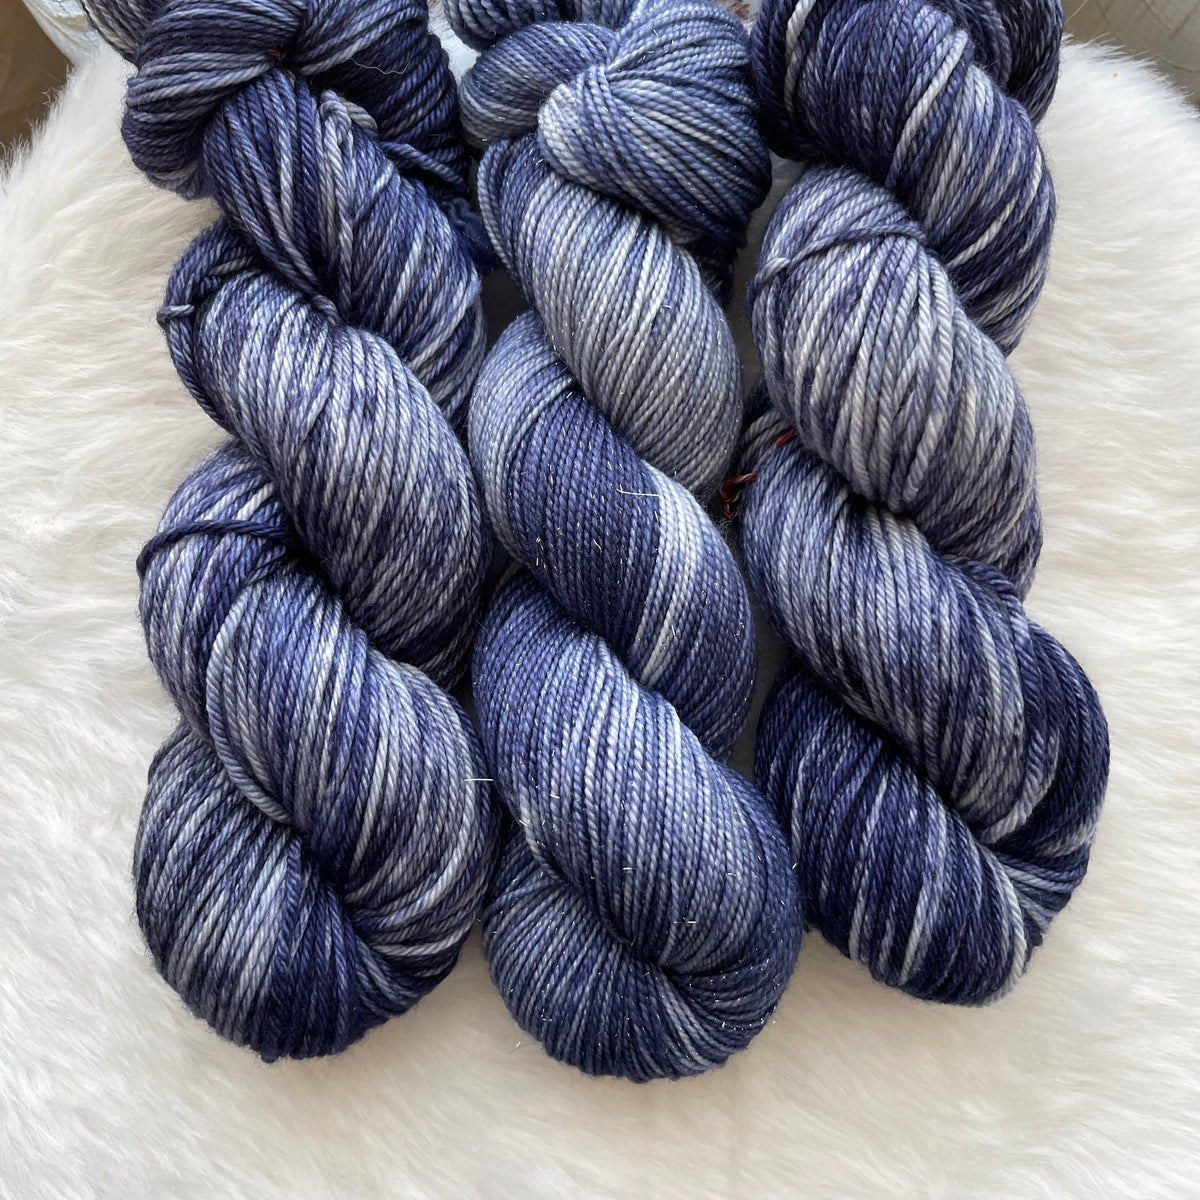 JULIE - Dyed to order- Hand Dyed Yarn Skein